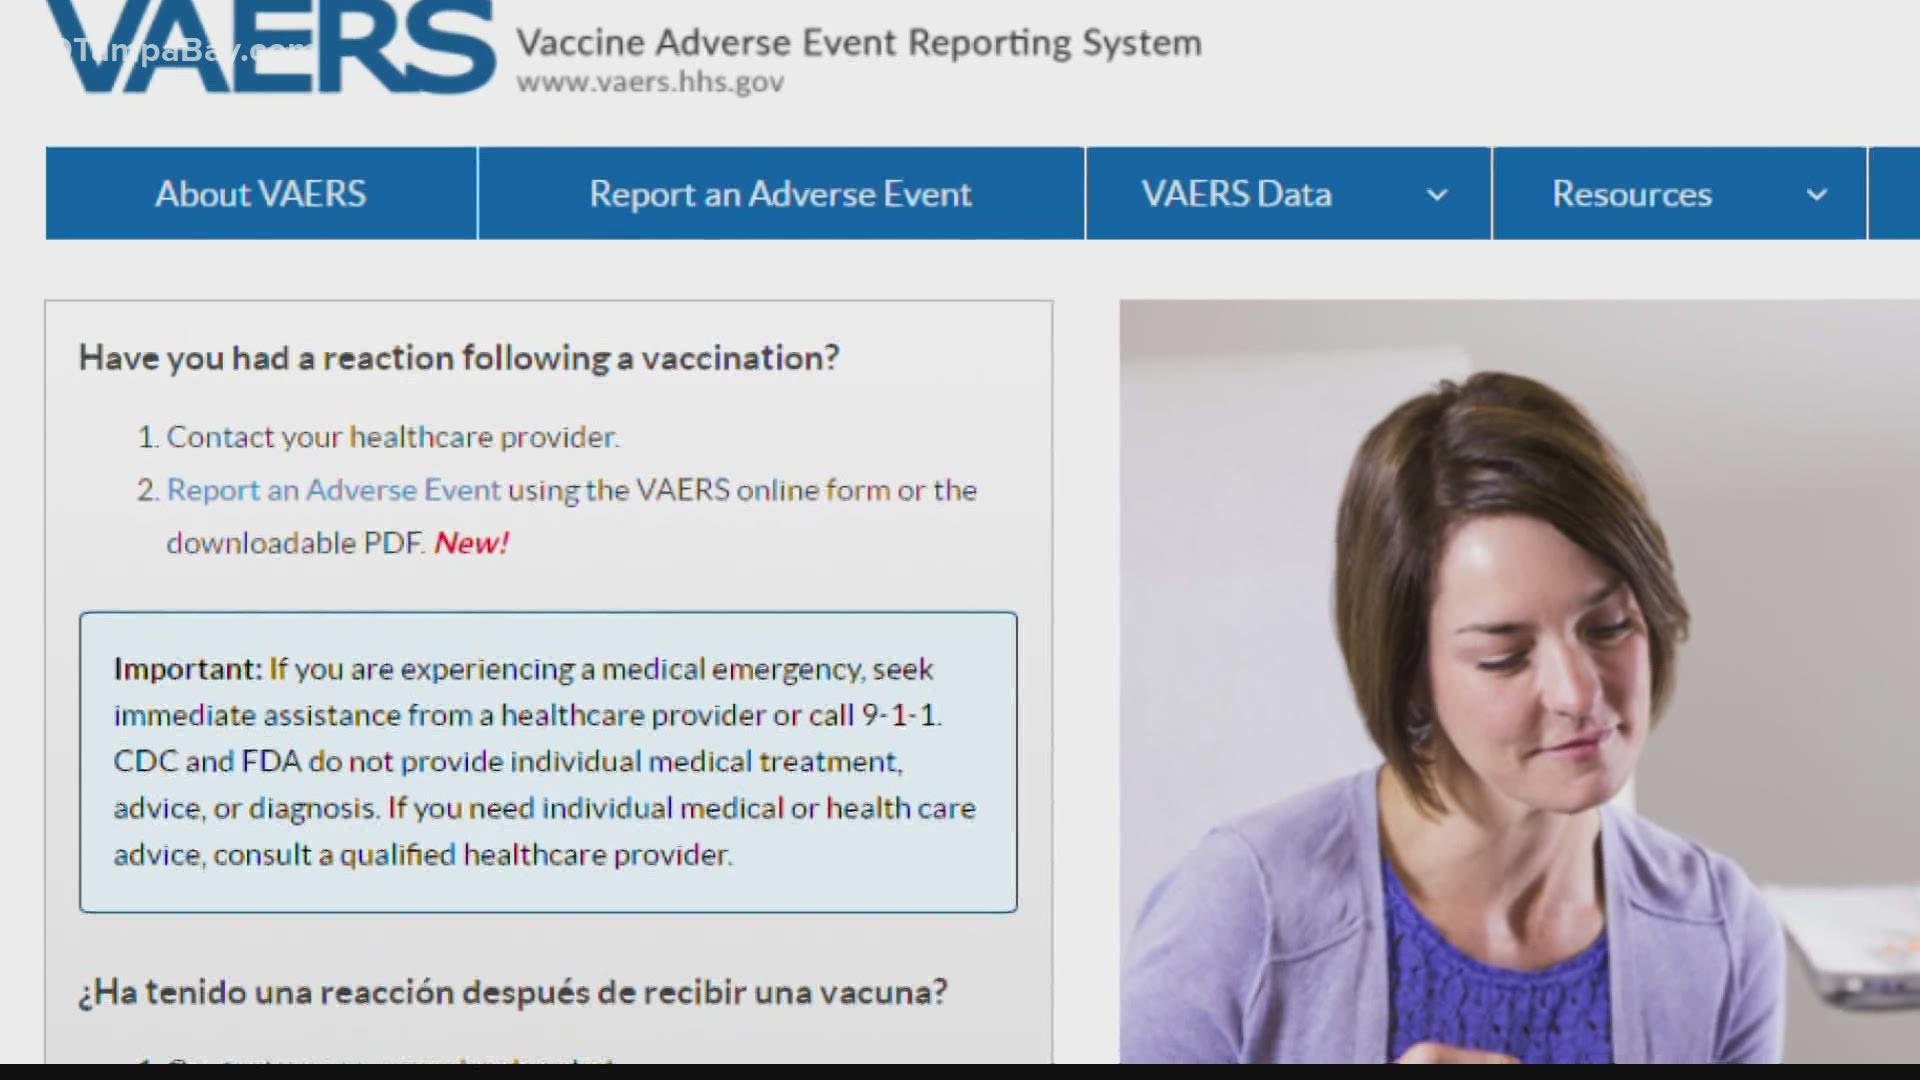 Anyone can report potential vaccine side effects to the VAERS database but doctors warn those reports are not verified evidence.